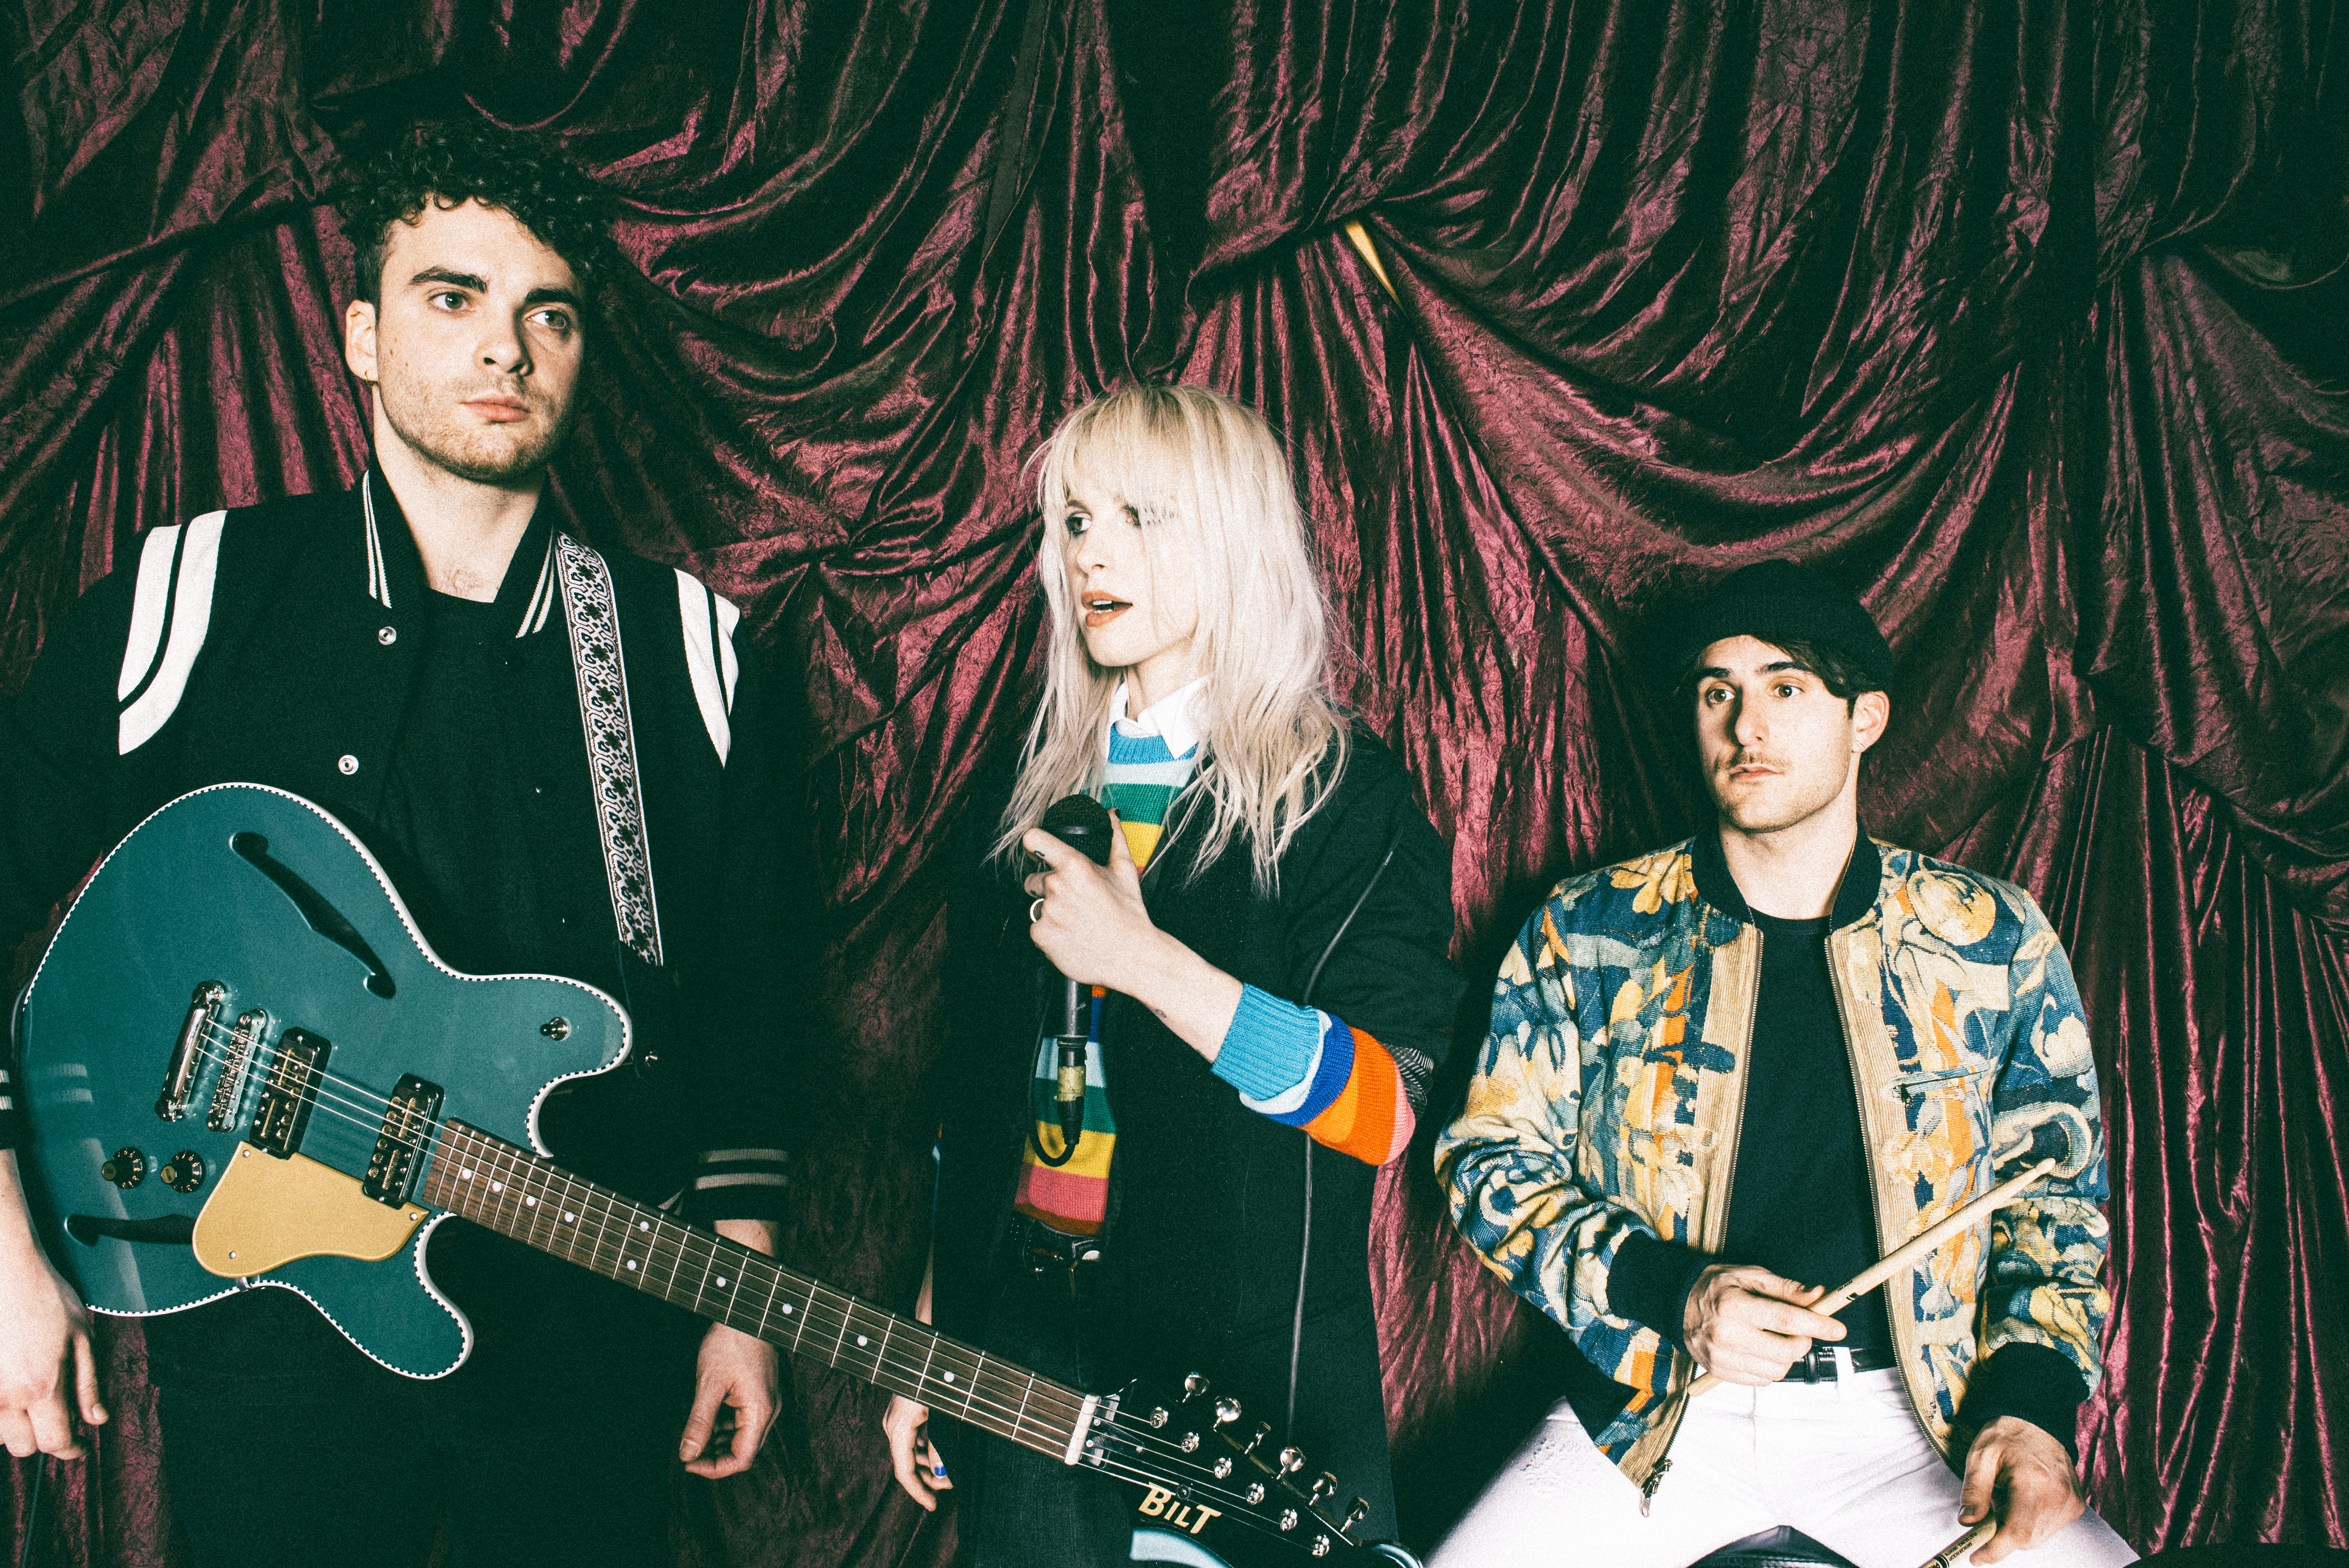 Paramore. From left to right: Taylor York, Hayley Williams and Zac Farro.
Photo credit: Lindsey Byrnes.